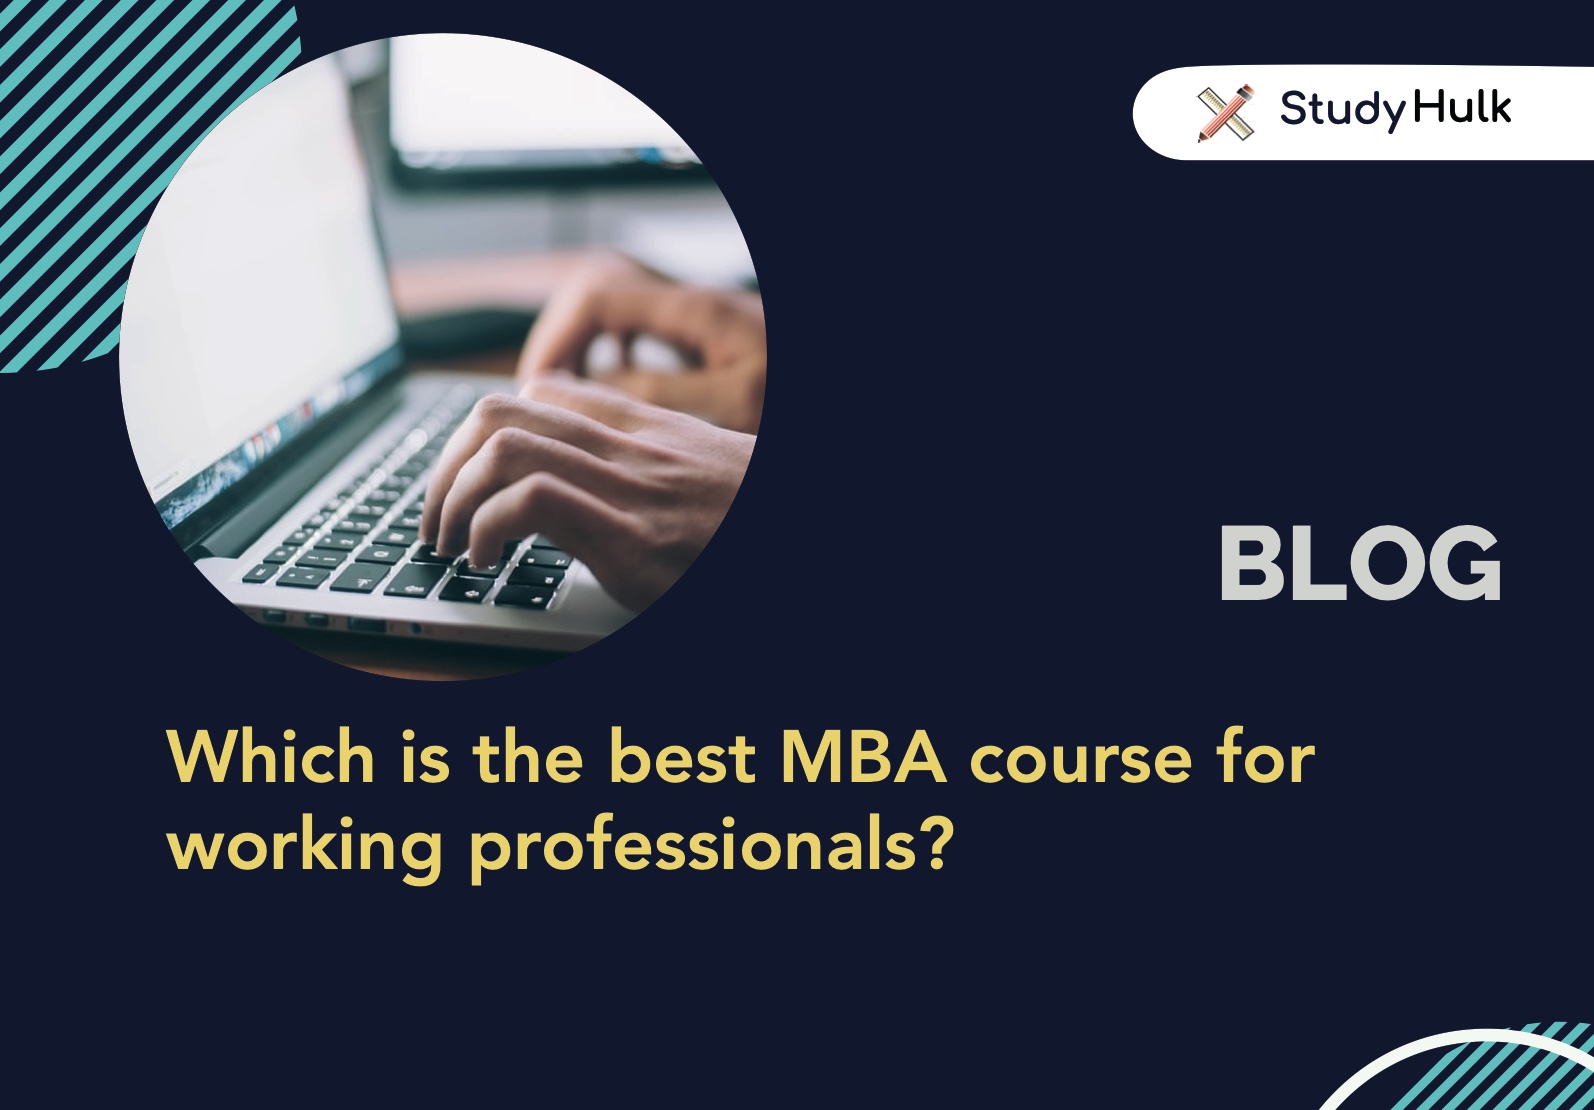 Blog post for Which is the best MBA course for working professionals